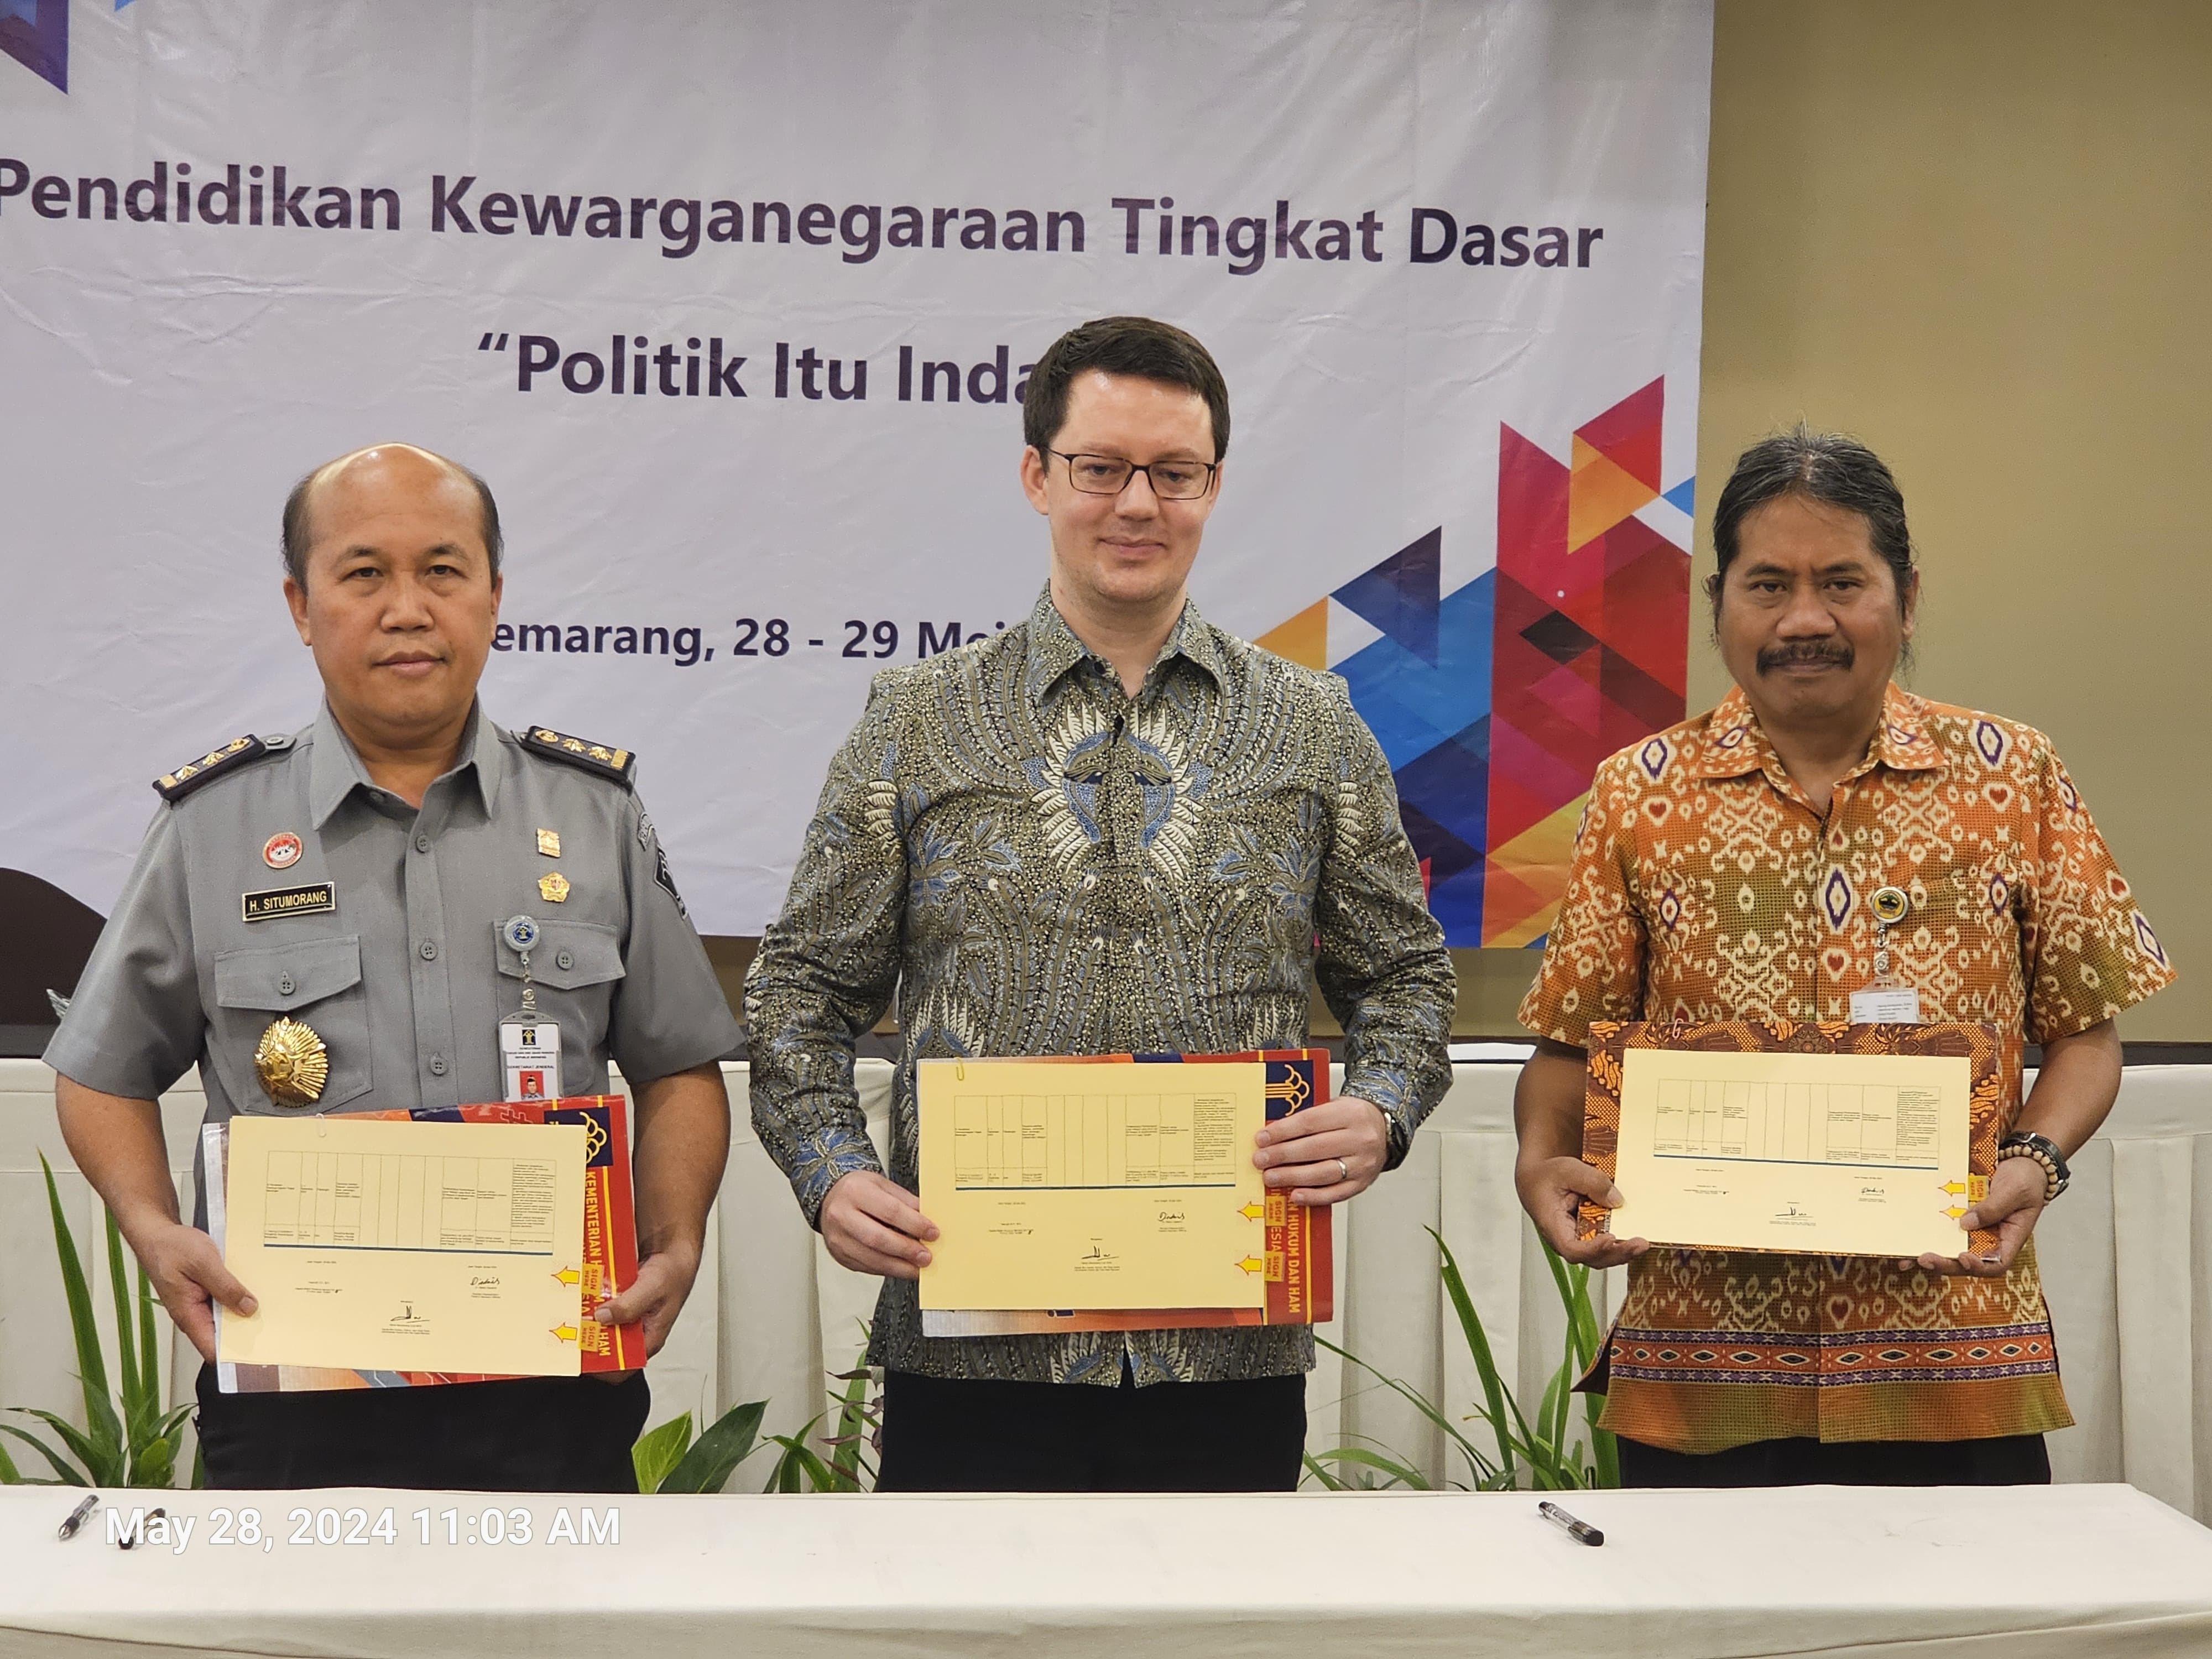 Hantor Situmorang (Head of Bureau of Public Relations, Law, and Cooperation at Ministry of Law and Human Rights Indonesia), standing alongside Dr. Stefan Diederich (Project Director at FNF Indonesia) and Agung Kristianto (Representative of the Head of the Office of National Unity and Politics of the Central Java Provincial Government). The three of them were holding the Annual Work Plan undertaken by each of their respective organizations.